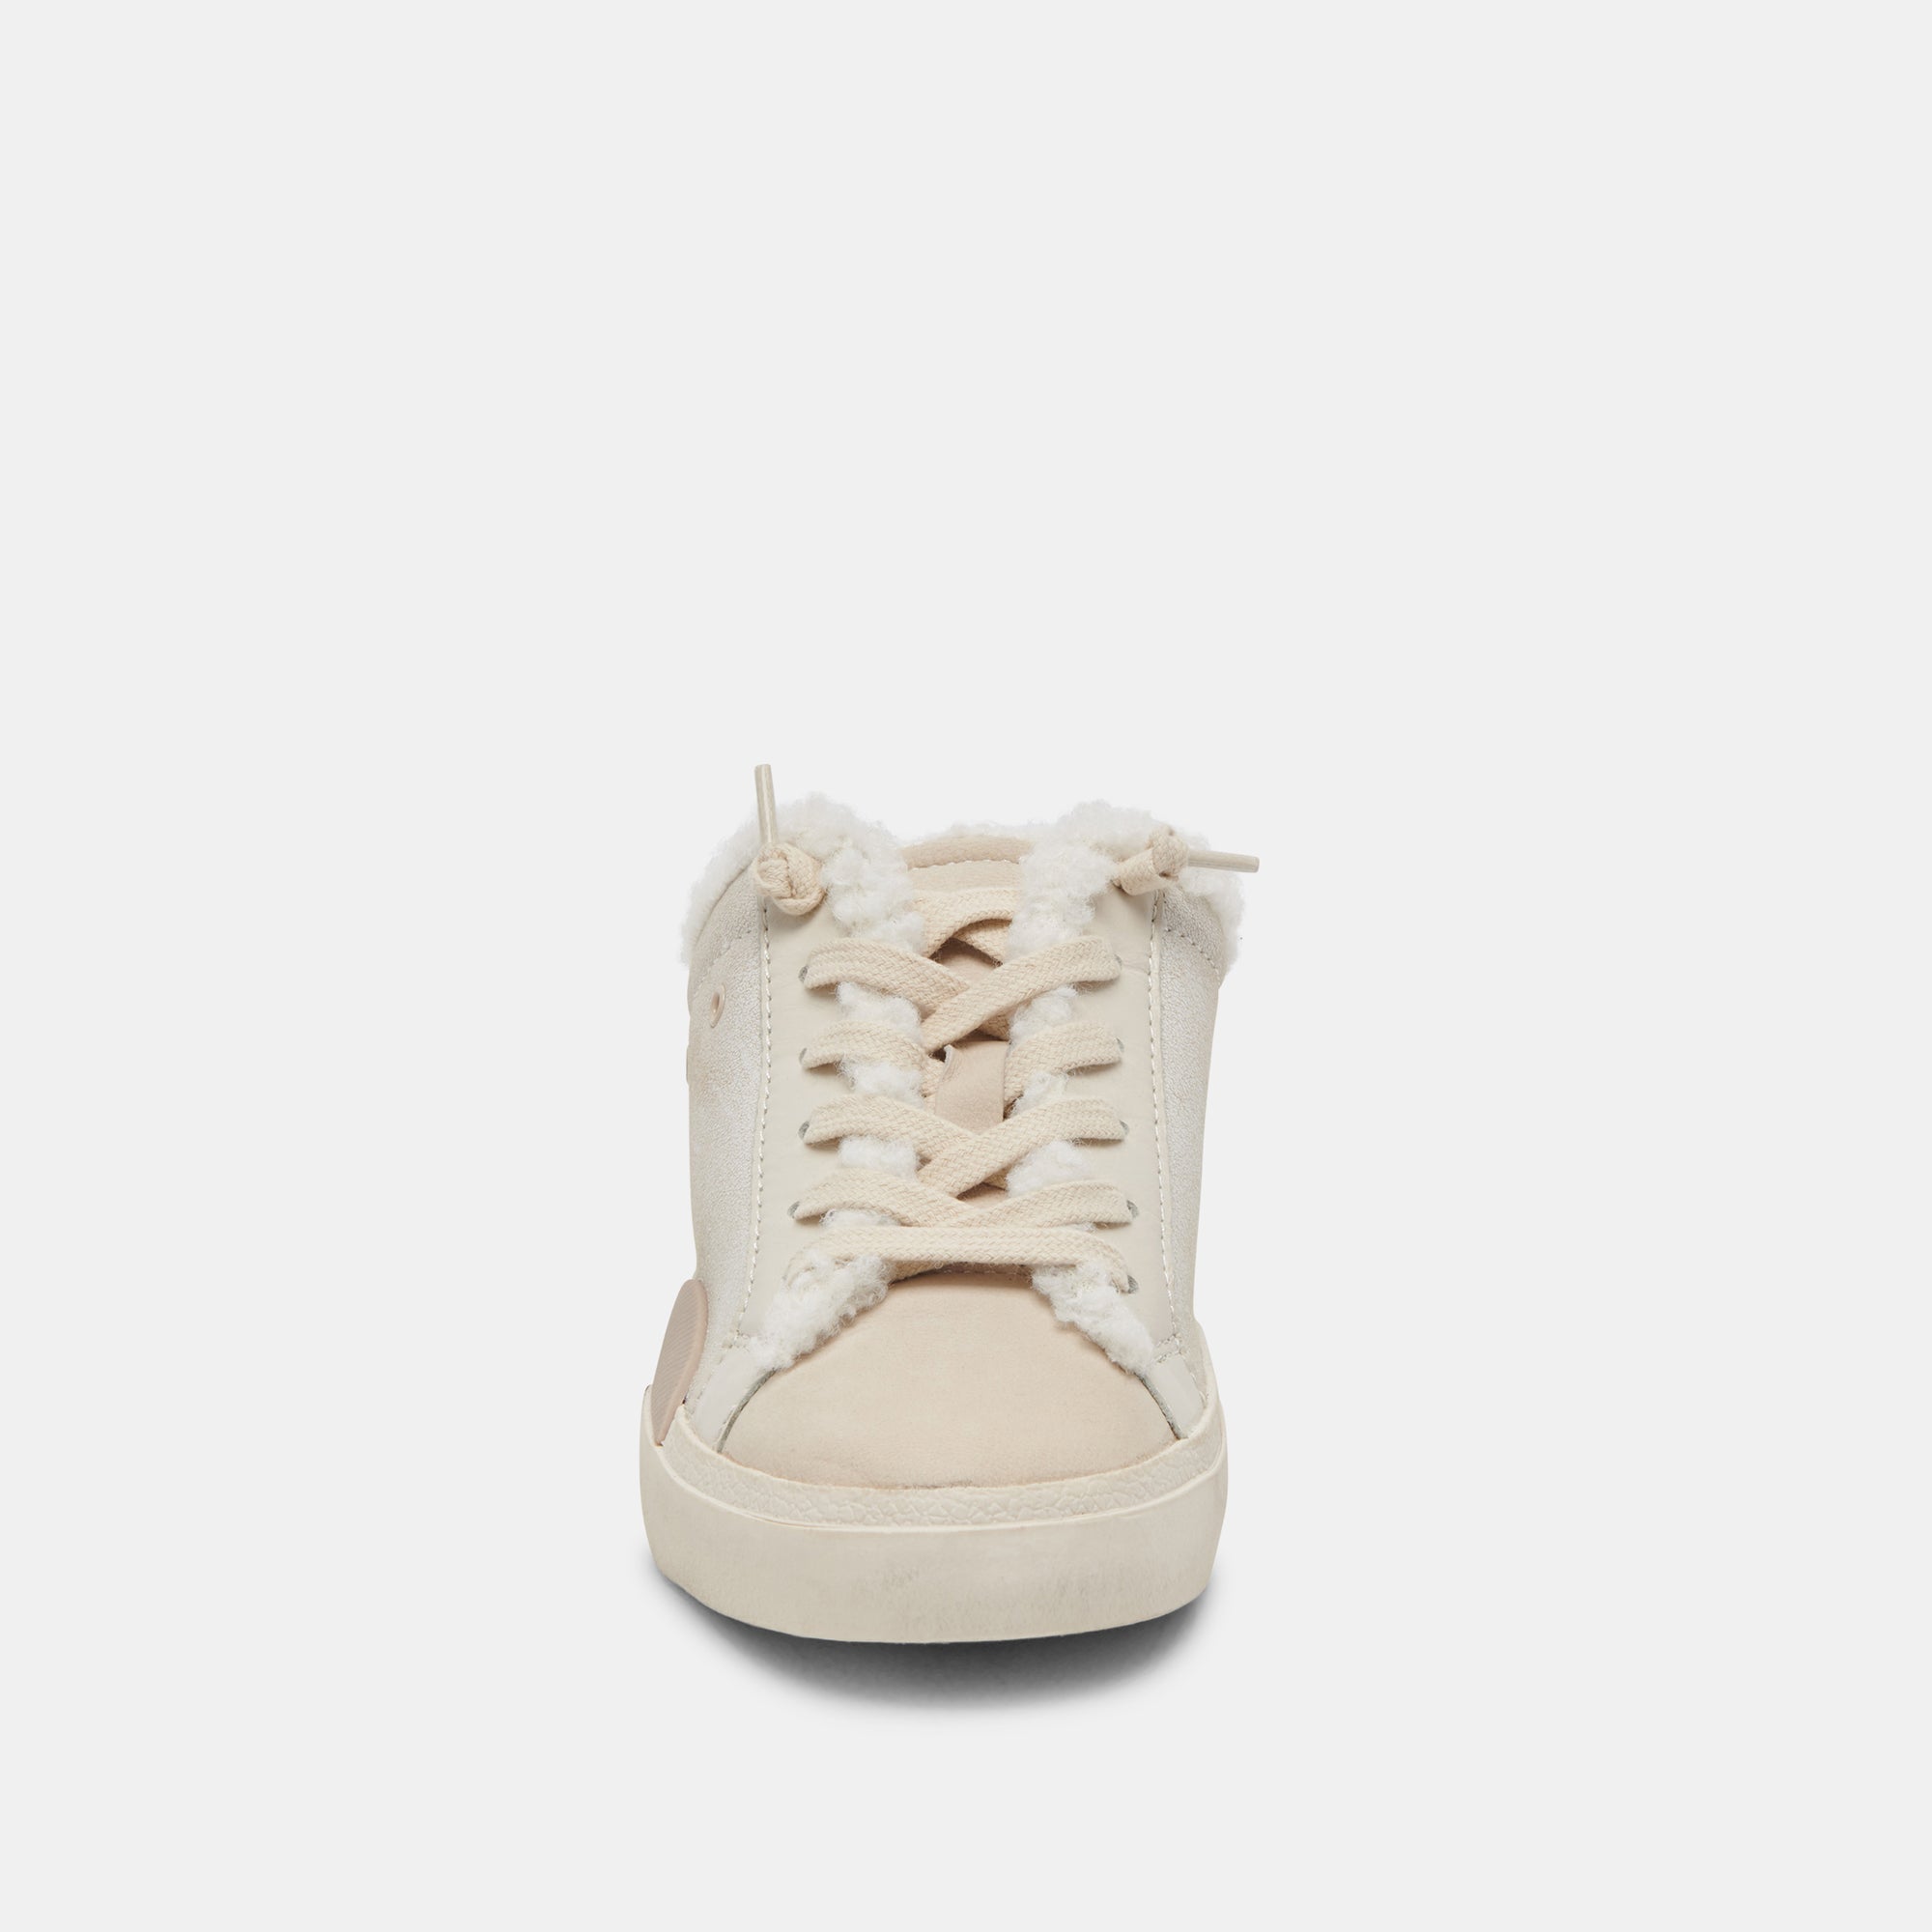 ZANTEL SNEAKERS OFF WHITE CRACKLED LEATHER – Dolce Vita